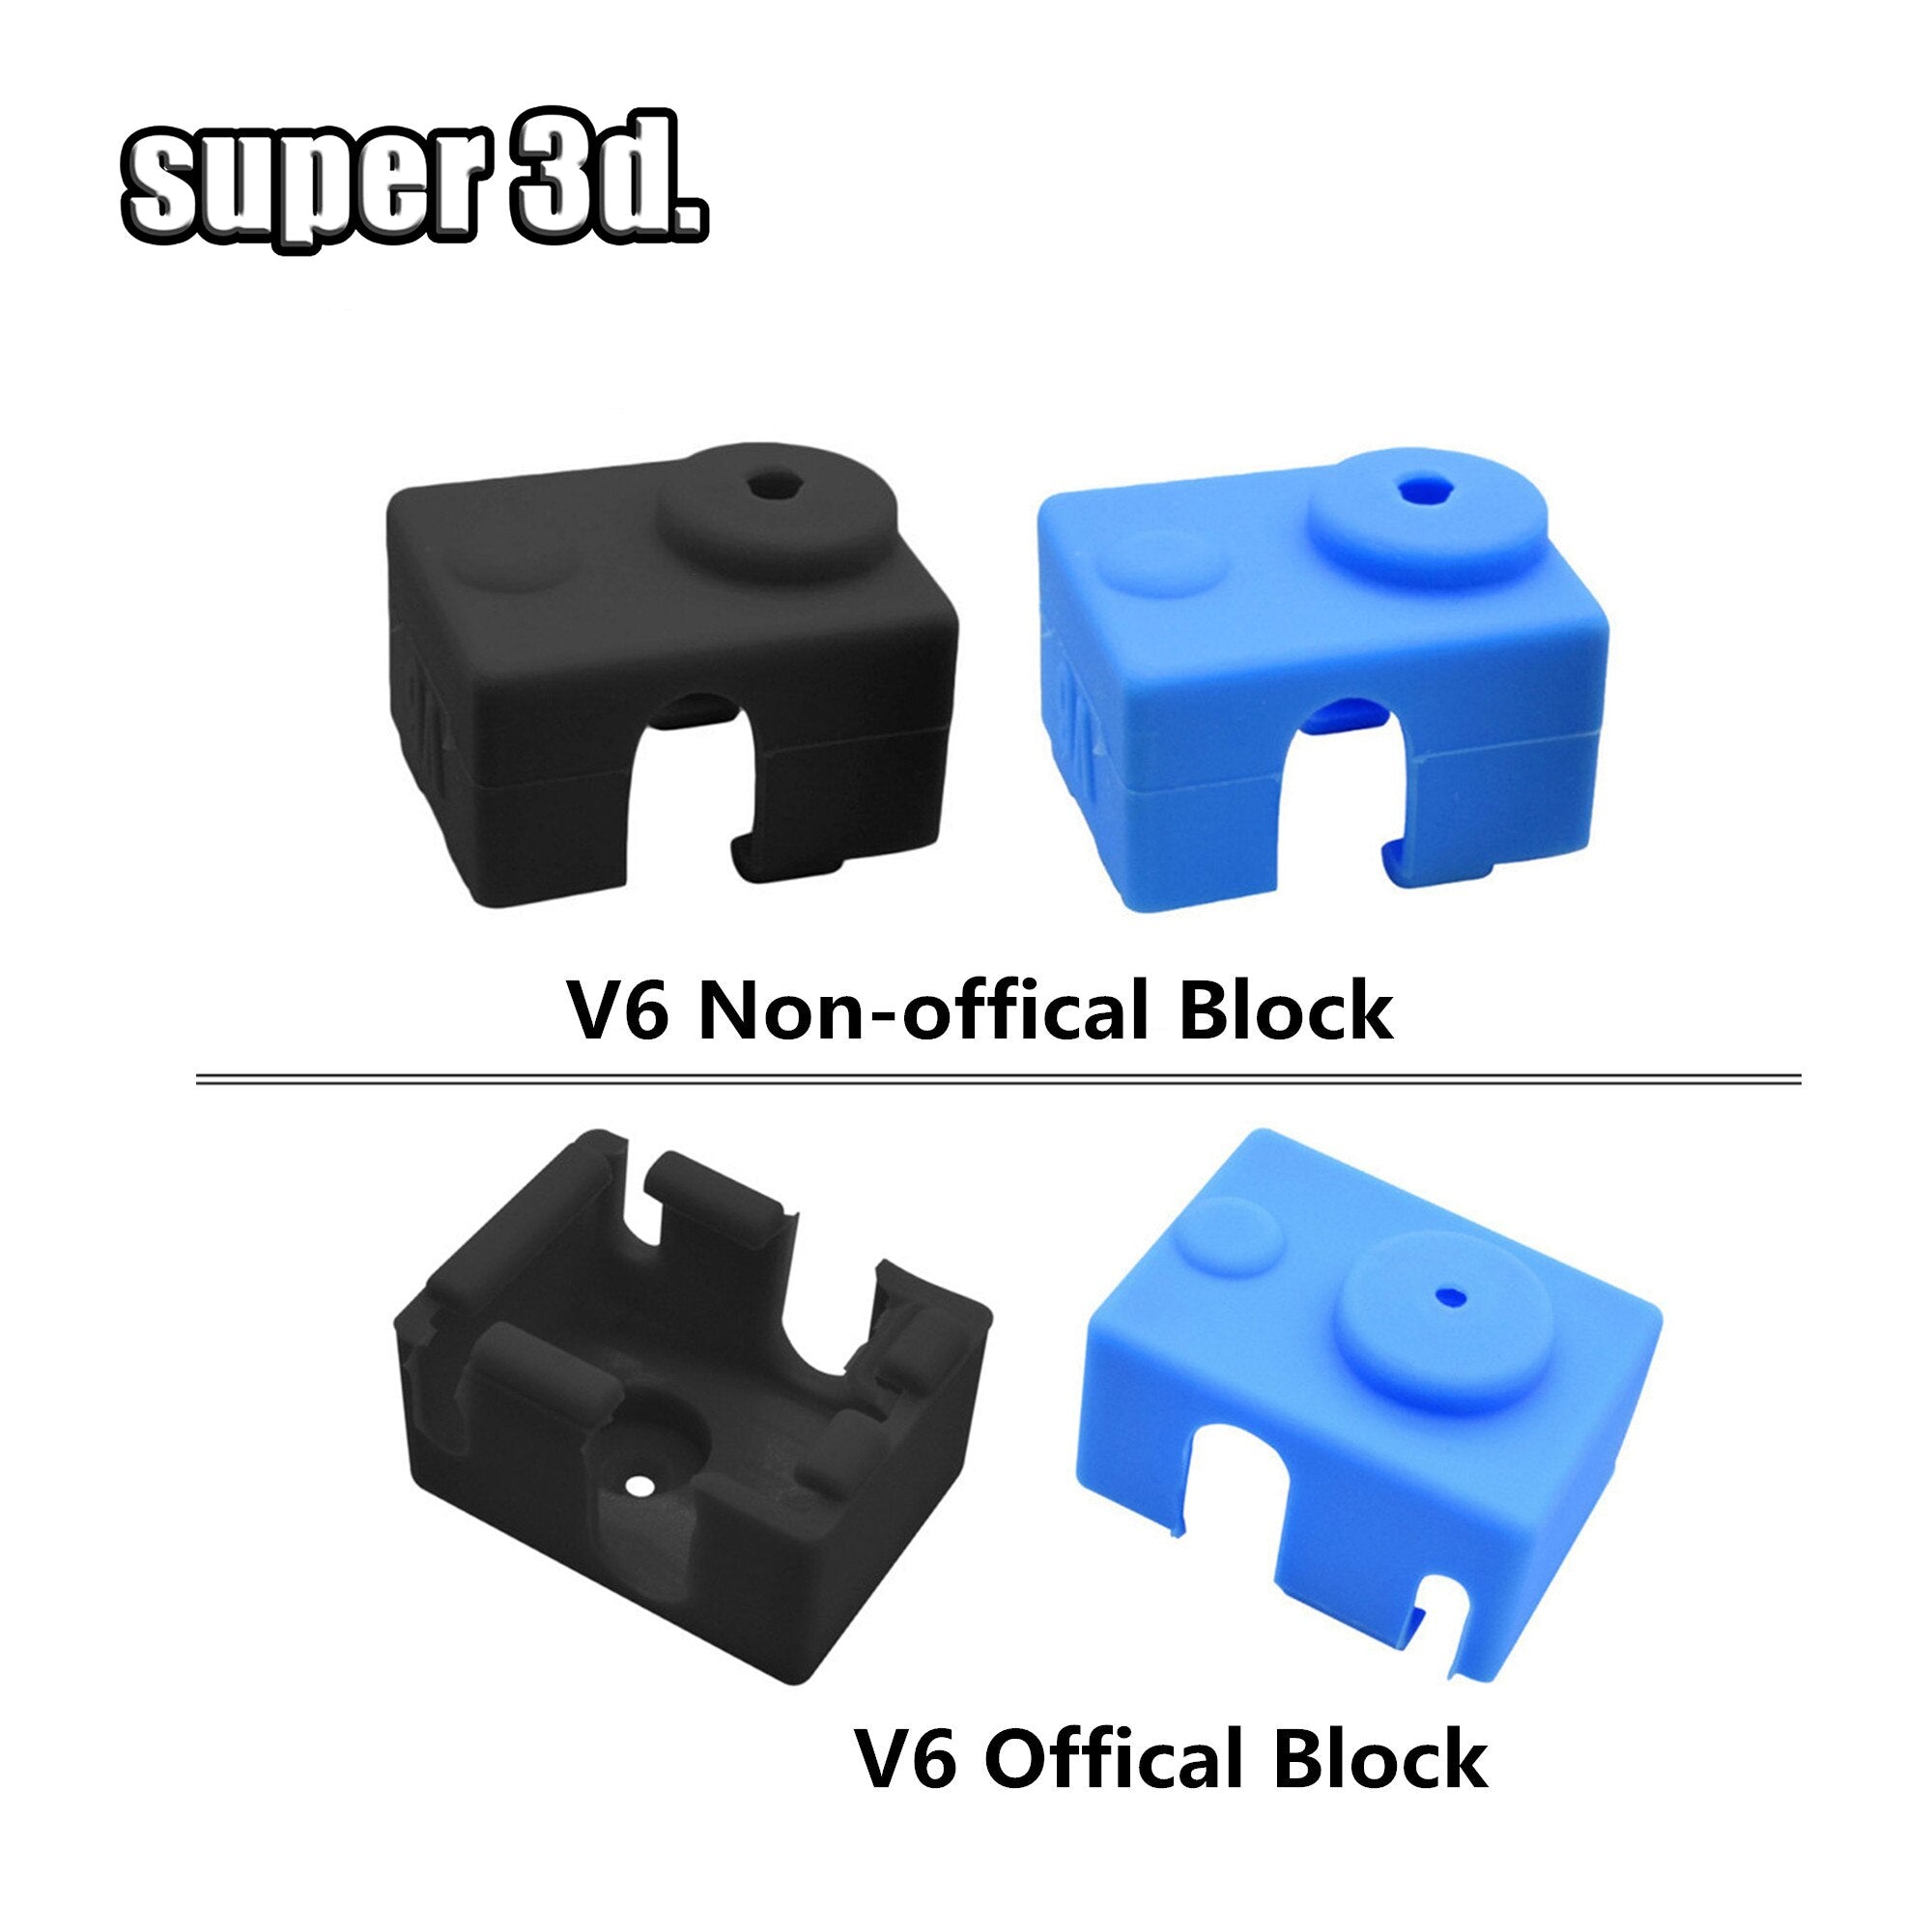 V5 V6 / MK7 MK8 MK9 / MK10 / Volcano Silicone Sock Heater Silicone Insulation Cover: Upgrade Your 3D Printing Experience - Xclusive Collectibles